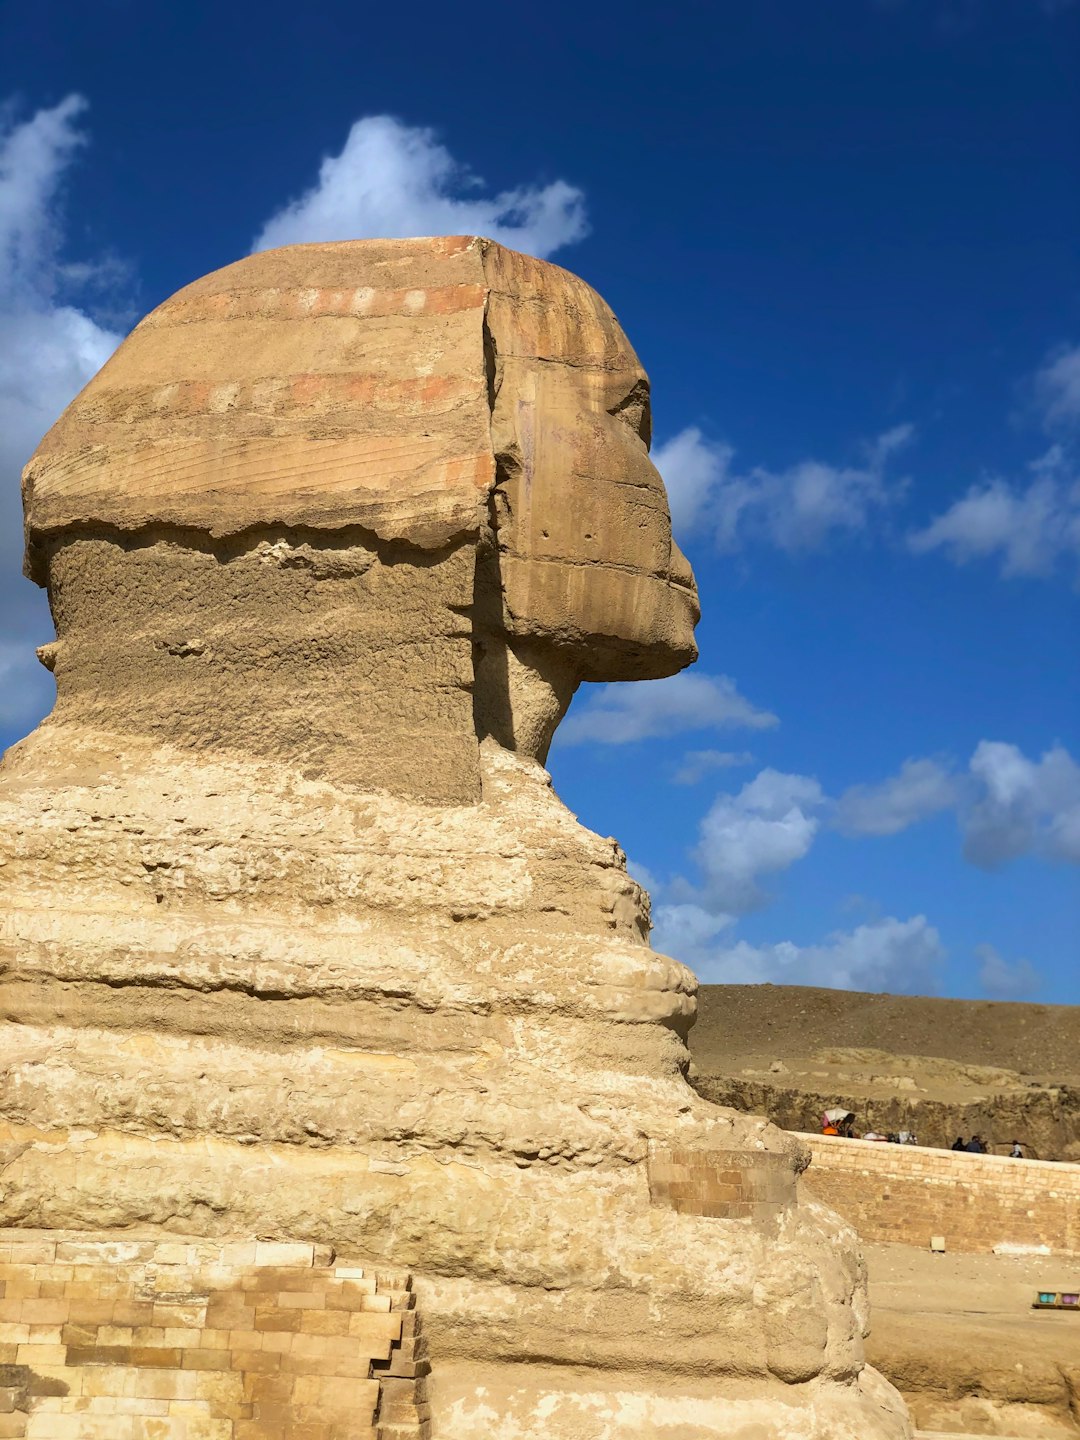 Travel Tips and Stories of Great Sphinx of Giza in Egypt